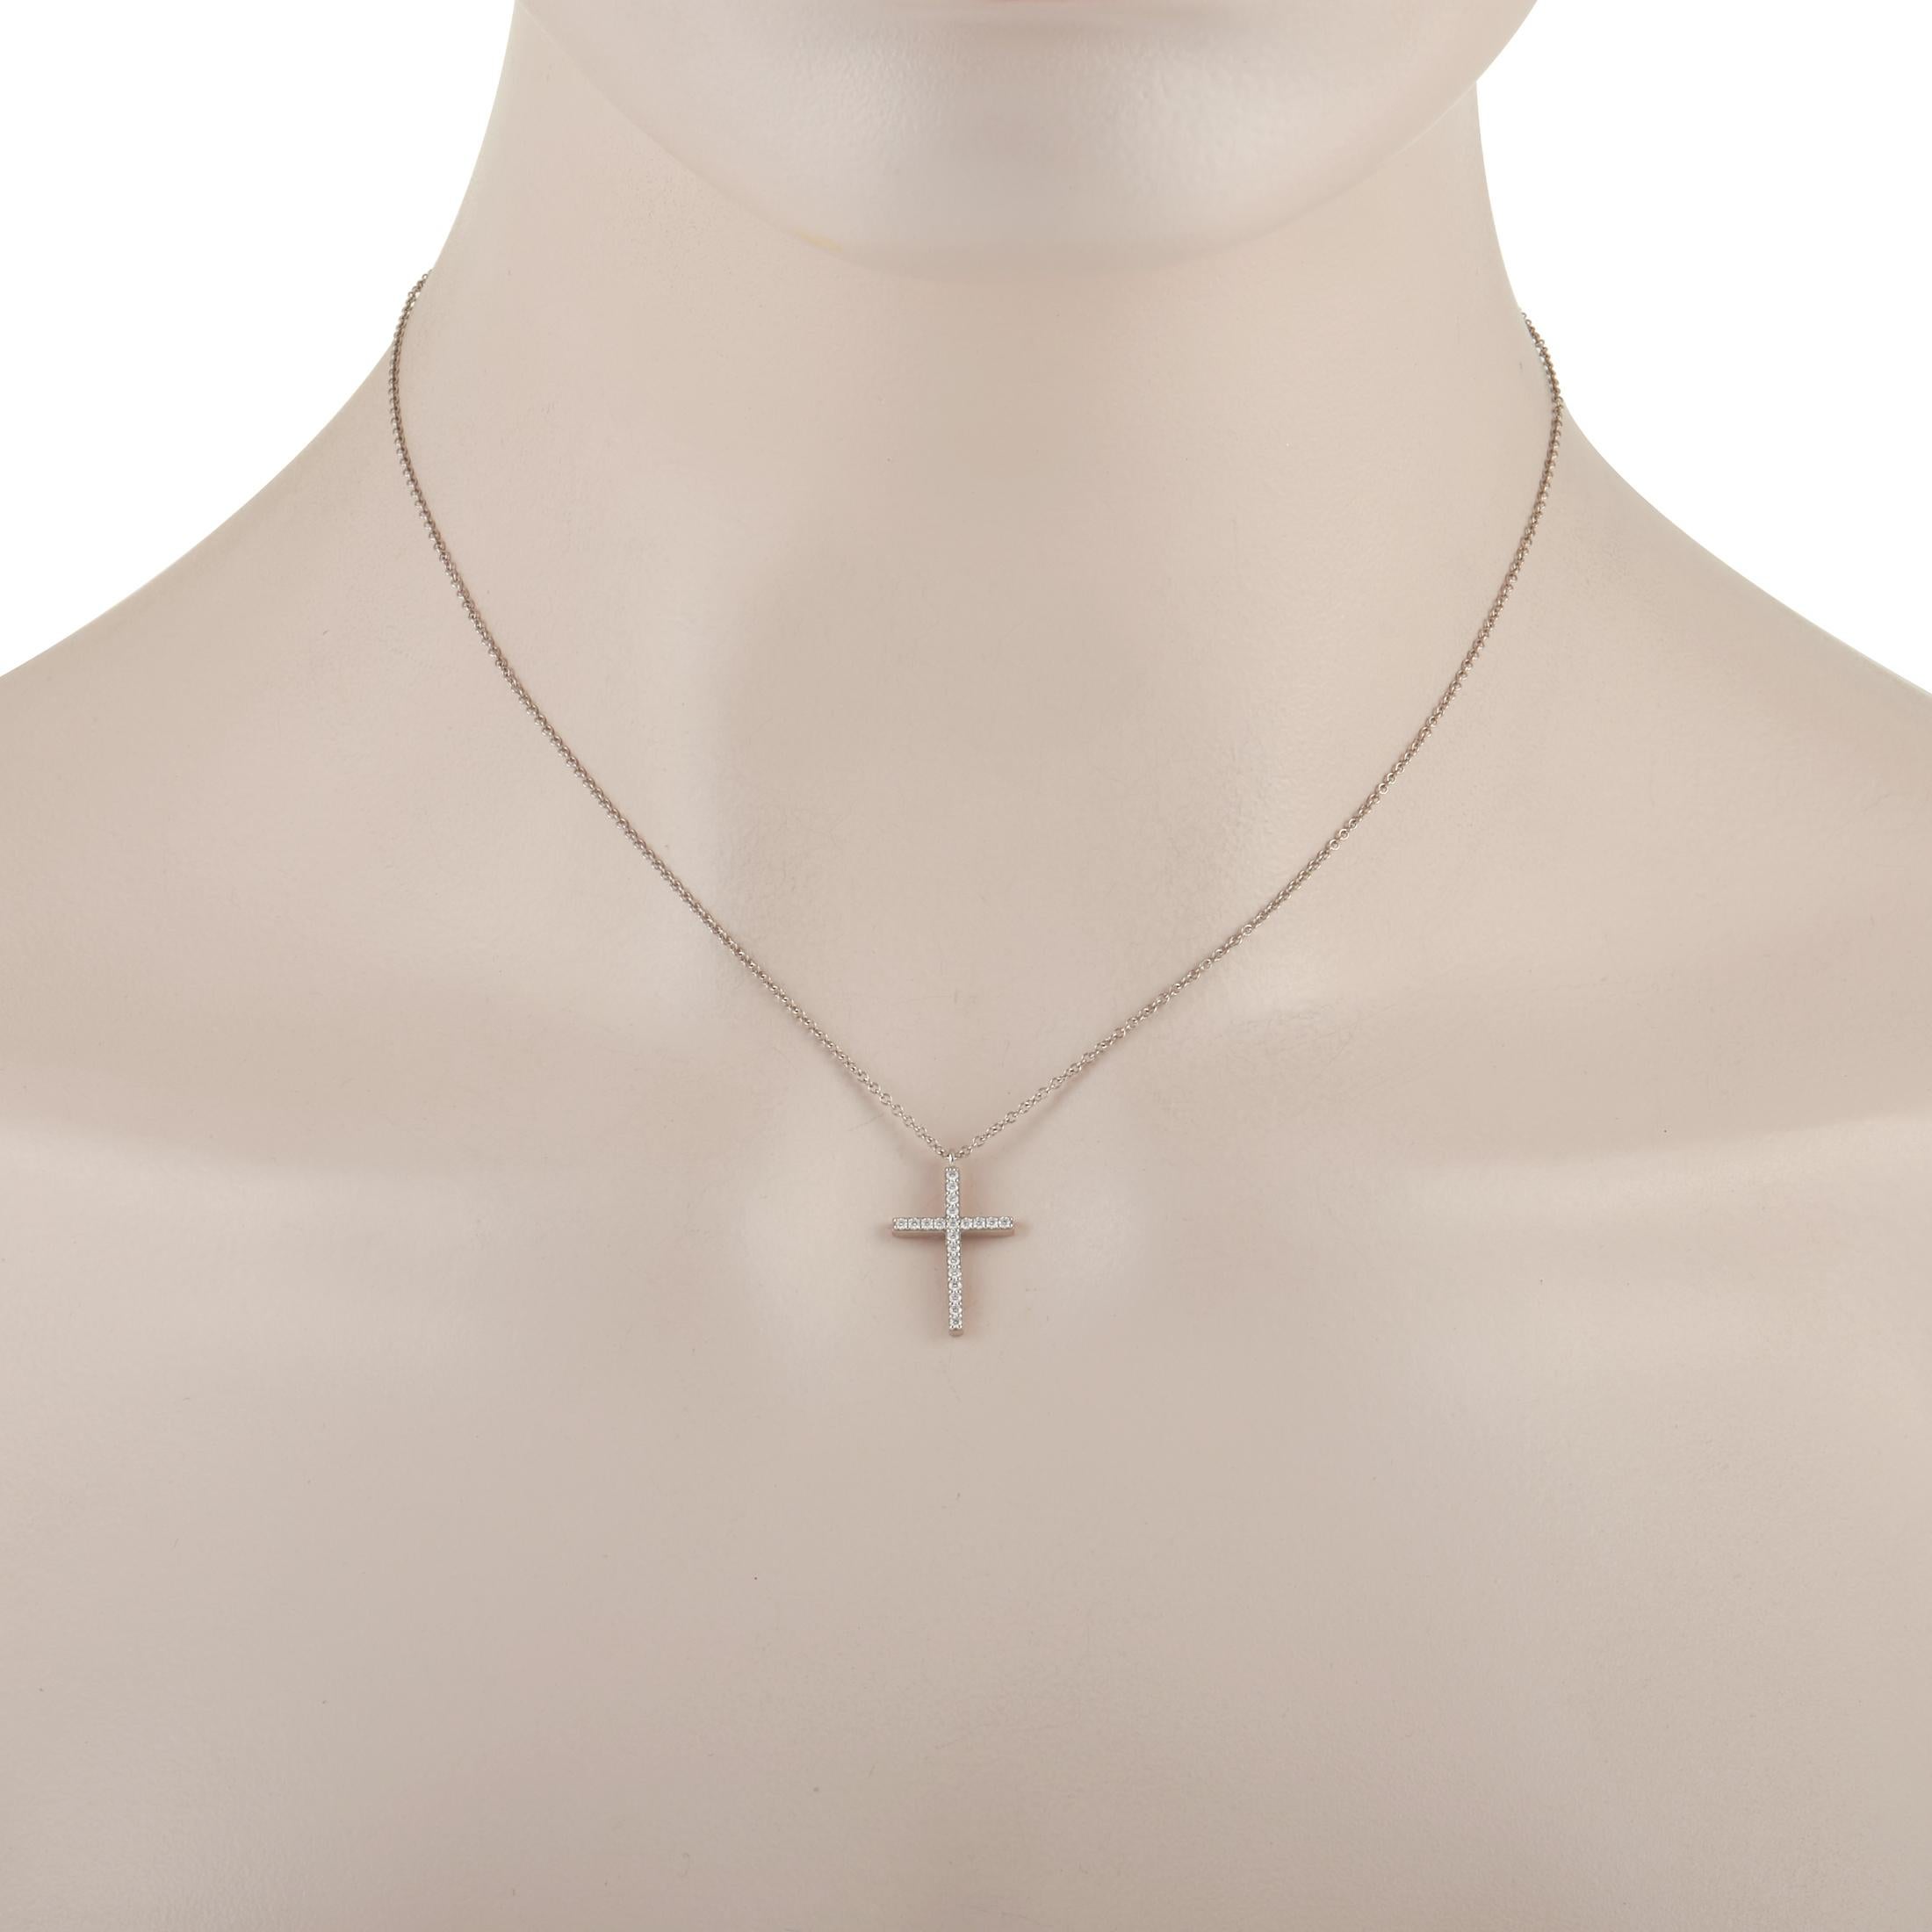 This stylish necklace from Tiffany & Co. is a beautiful celebration of faith. Suspended from a 16” chain, you’ll find an elegant cross-shaped pendant measuring .75” long and .5” wide that is covered in sparkling diamonds. A platinum setting only